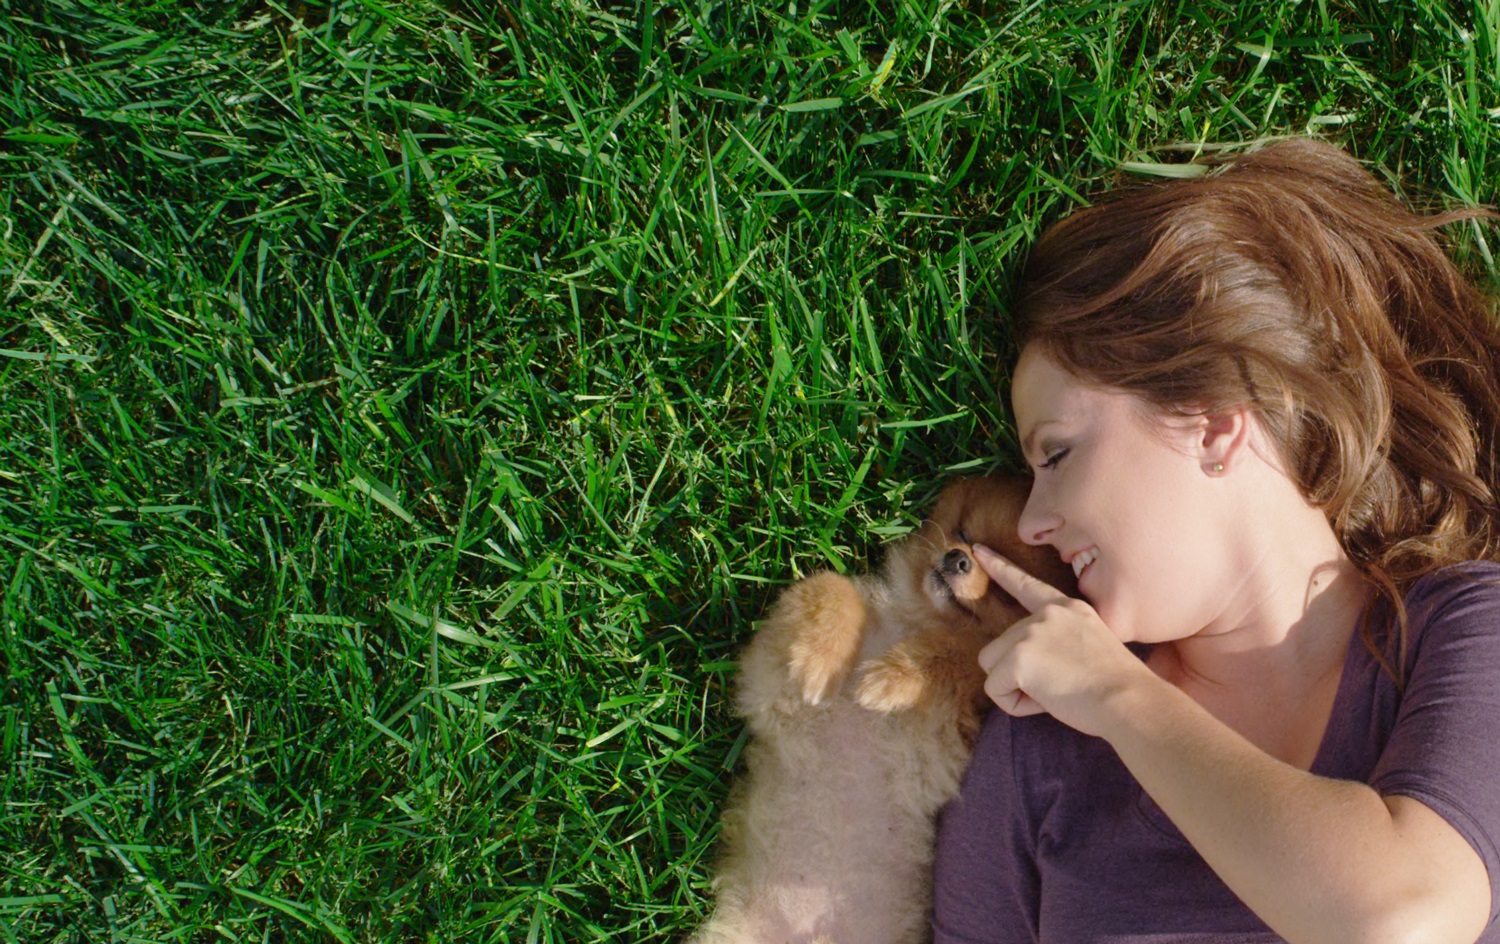 Pretty Woman playing with cute puppy on manicured green grass showing lawn care in Houston